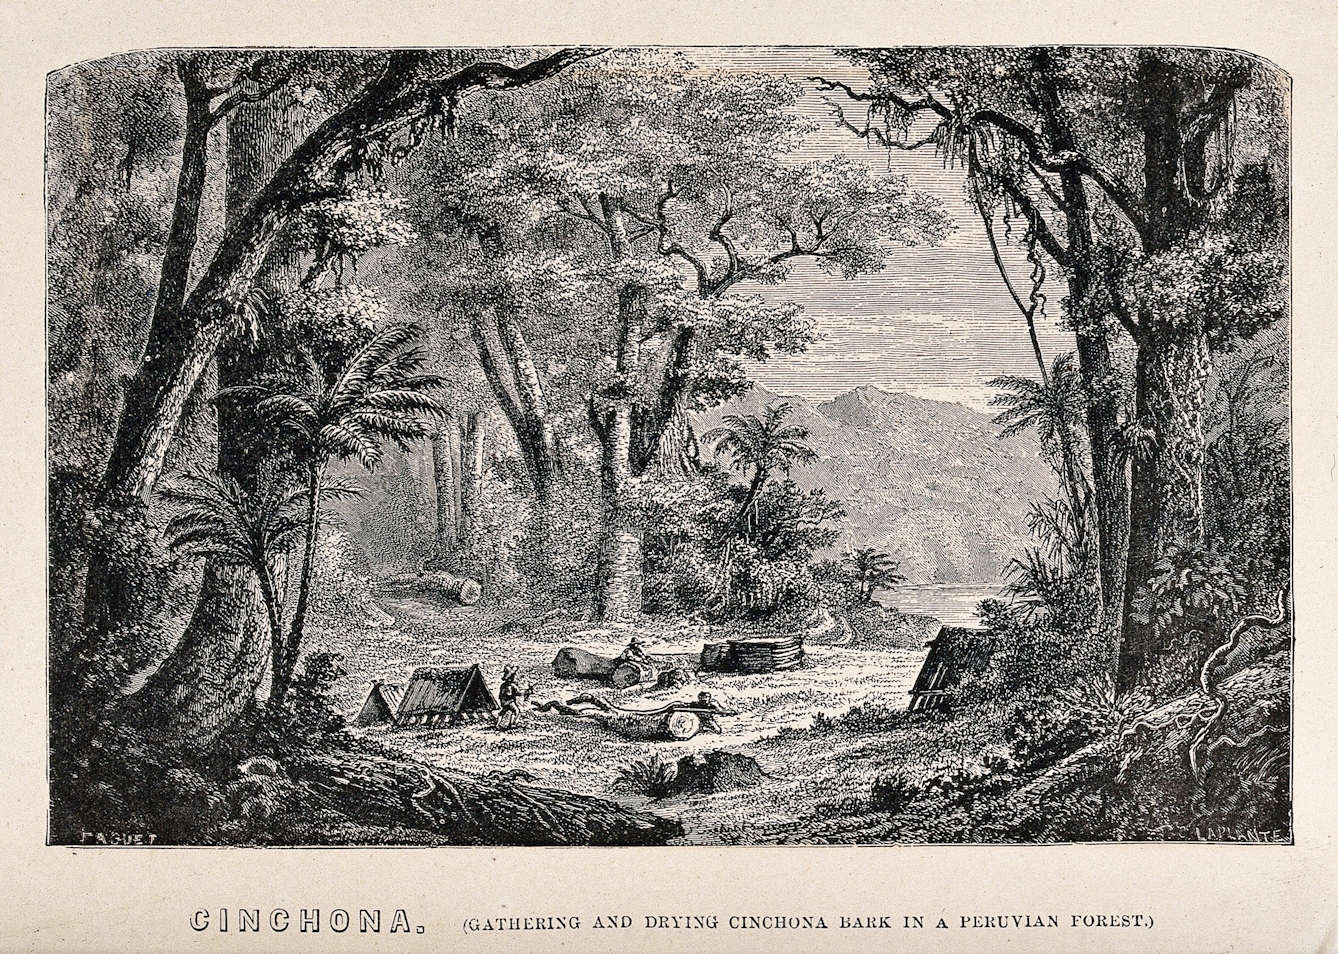 Three figures collecting and drying cinchona bark in a forest clearing in the Preuvian forest of the Andes.